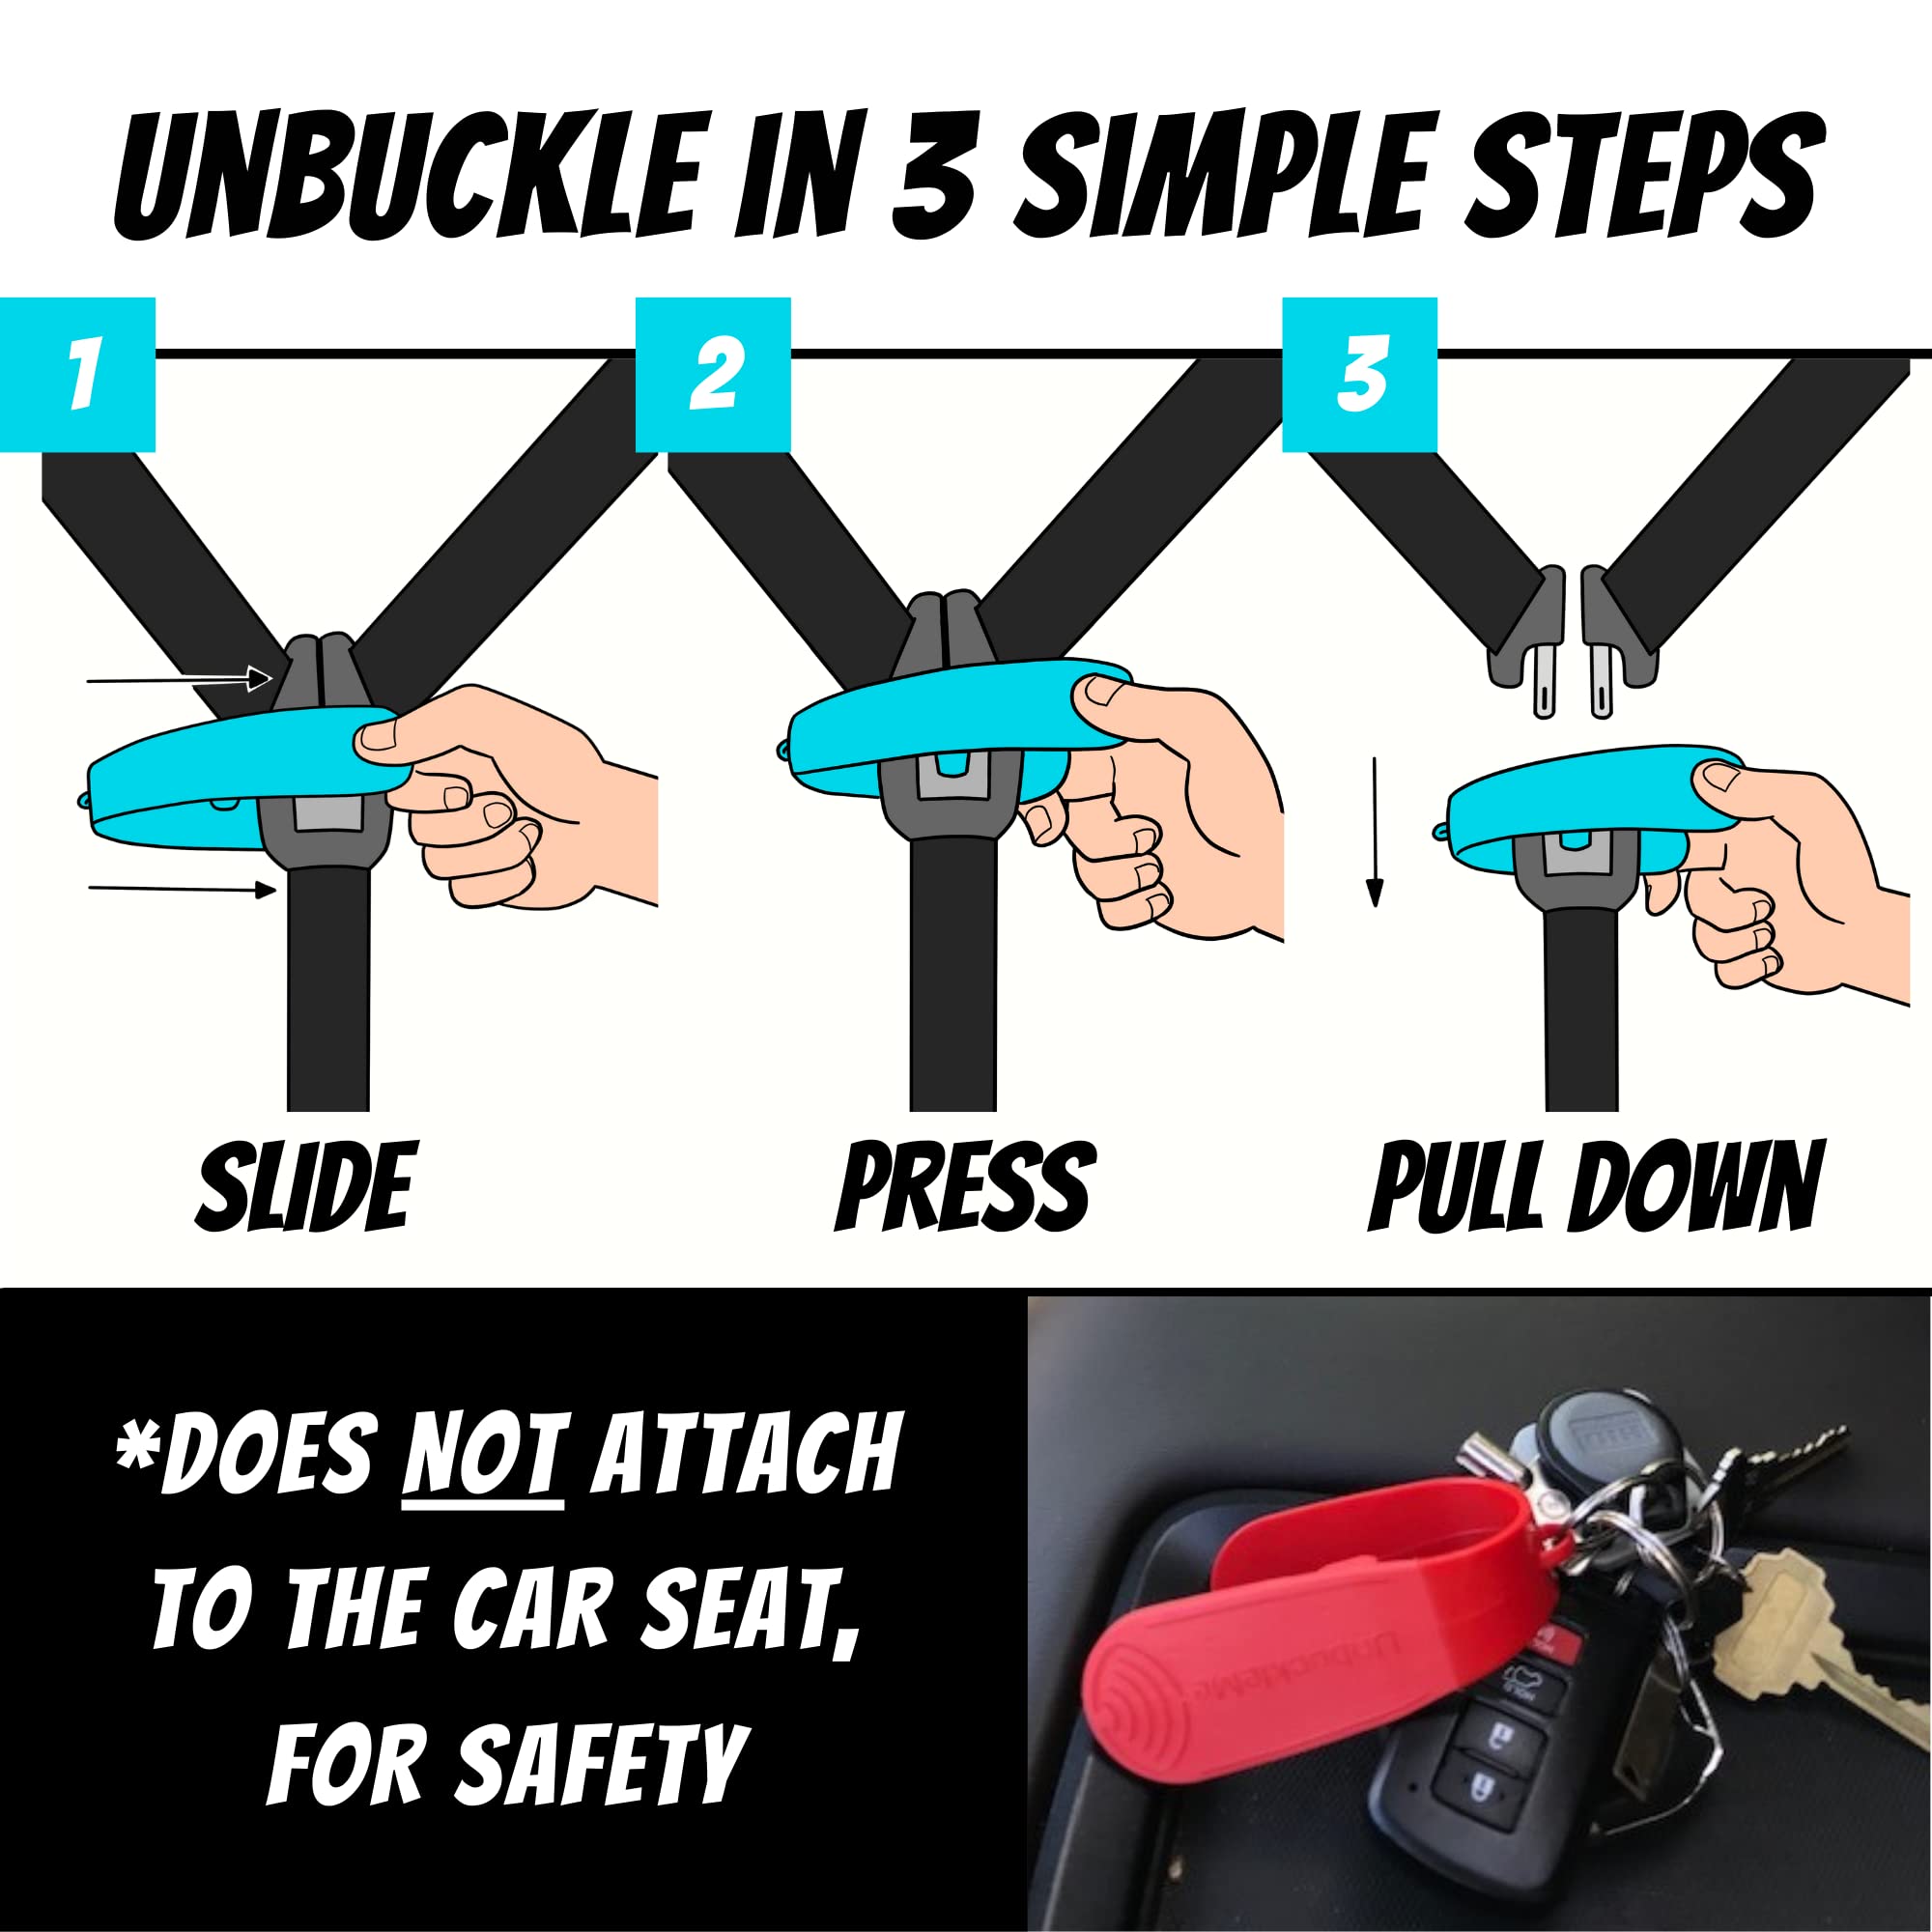 UnbuckleMe Car Seat Buckle Release Tool - Easy Opener Aid for Arthritis, Long Nails, Older Kids - Button Pusher for Infant, Toddler, Convertible 5 pt Harness car Seats - As Seen on Shark Tank (Aqua)